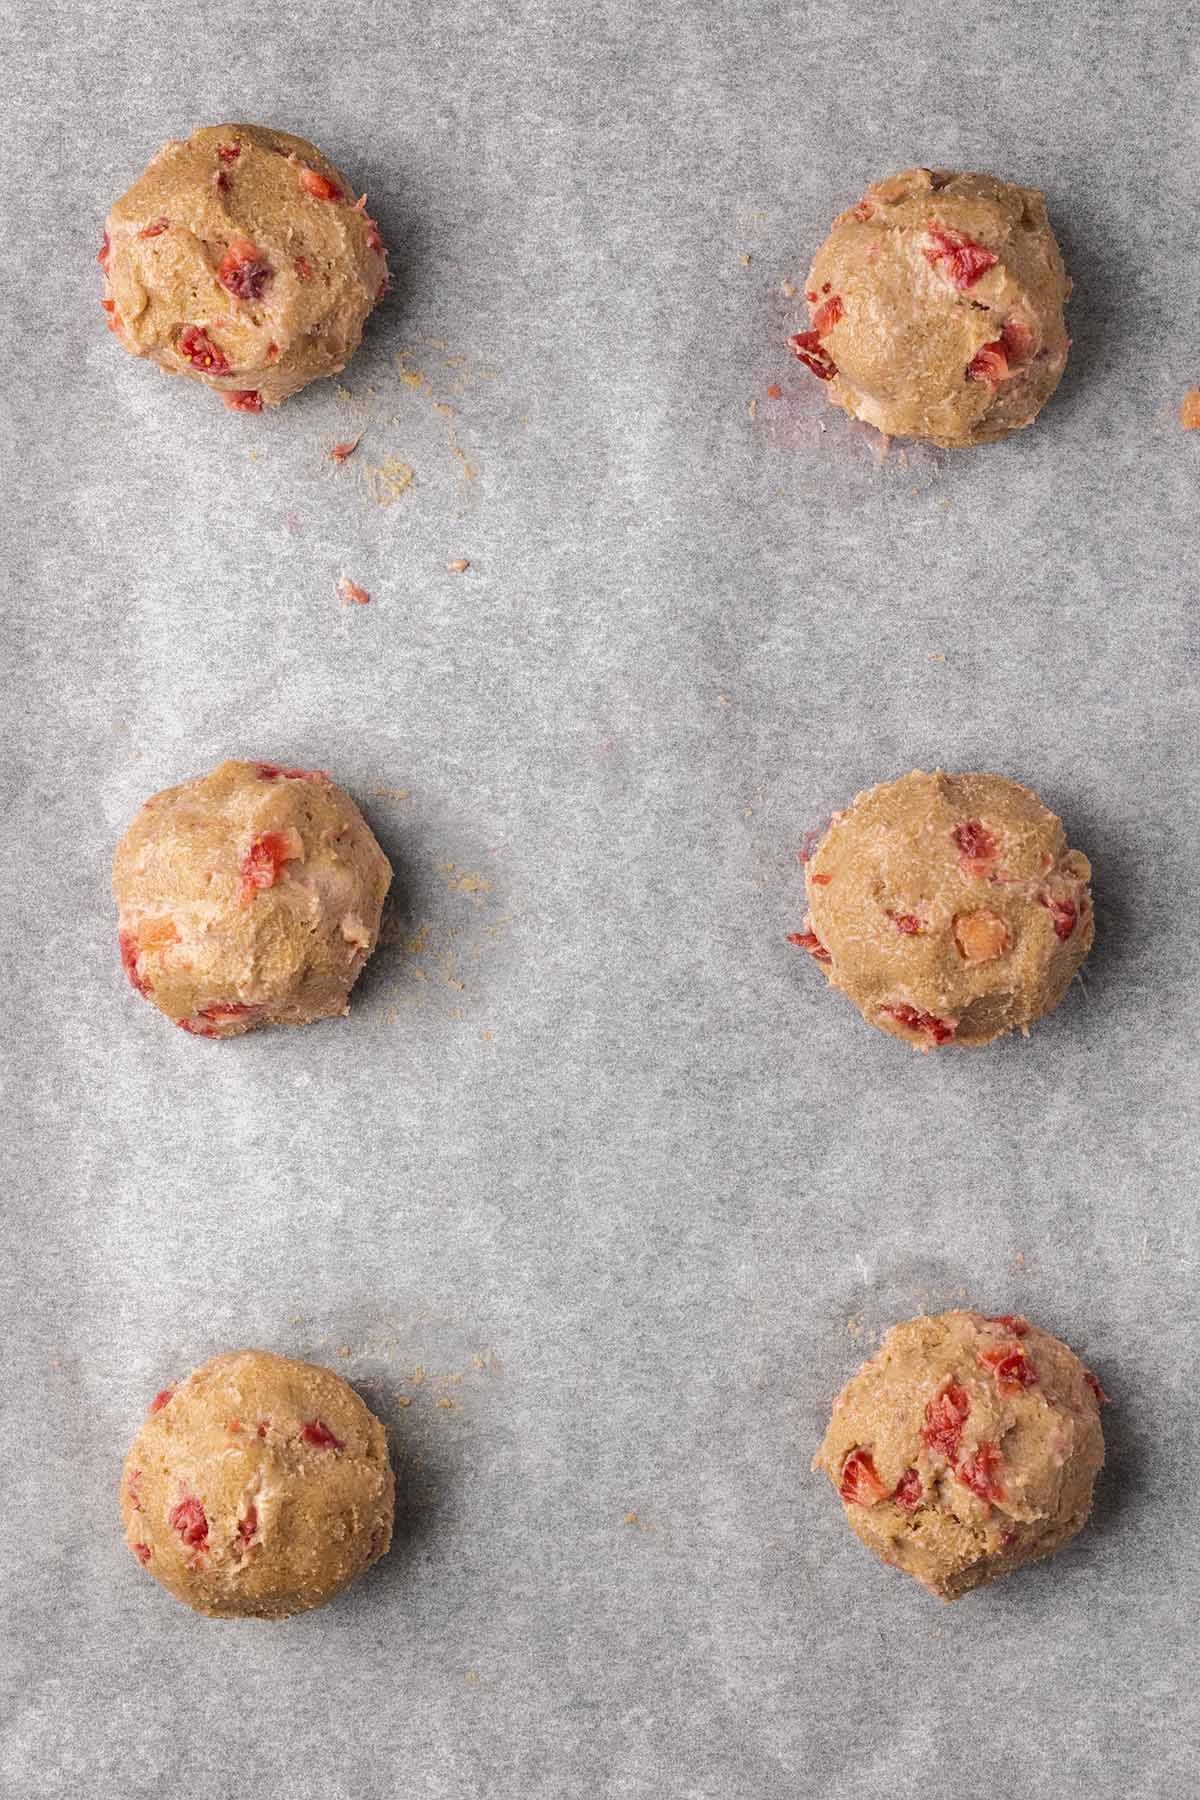 The process of making strawberry cheesecake cookies